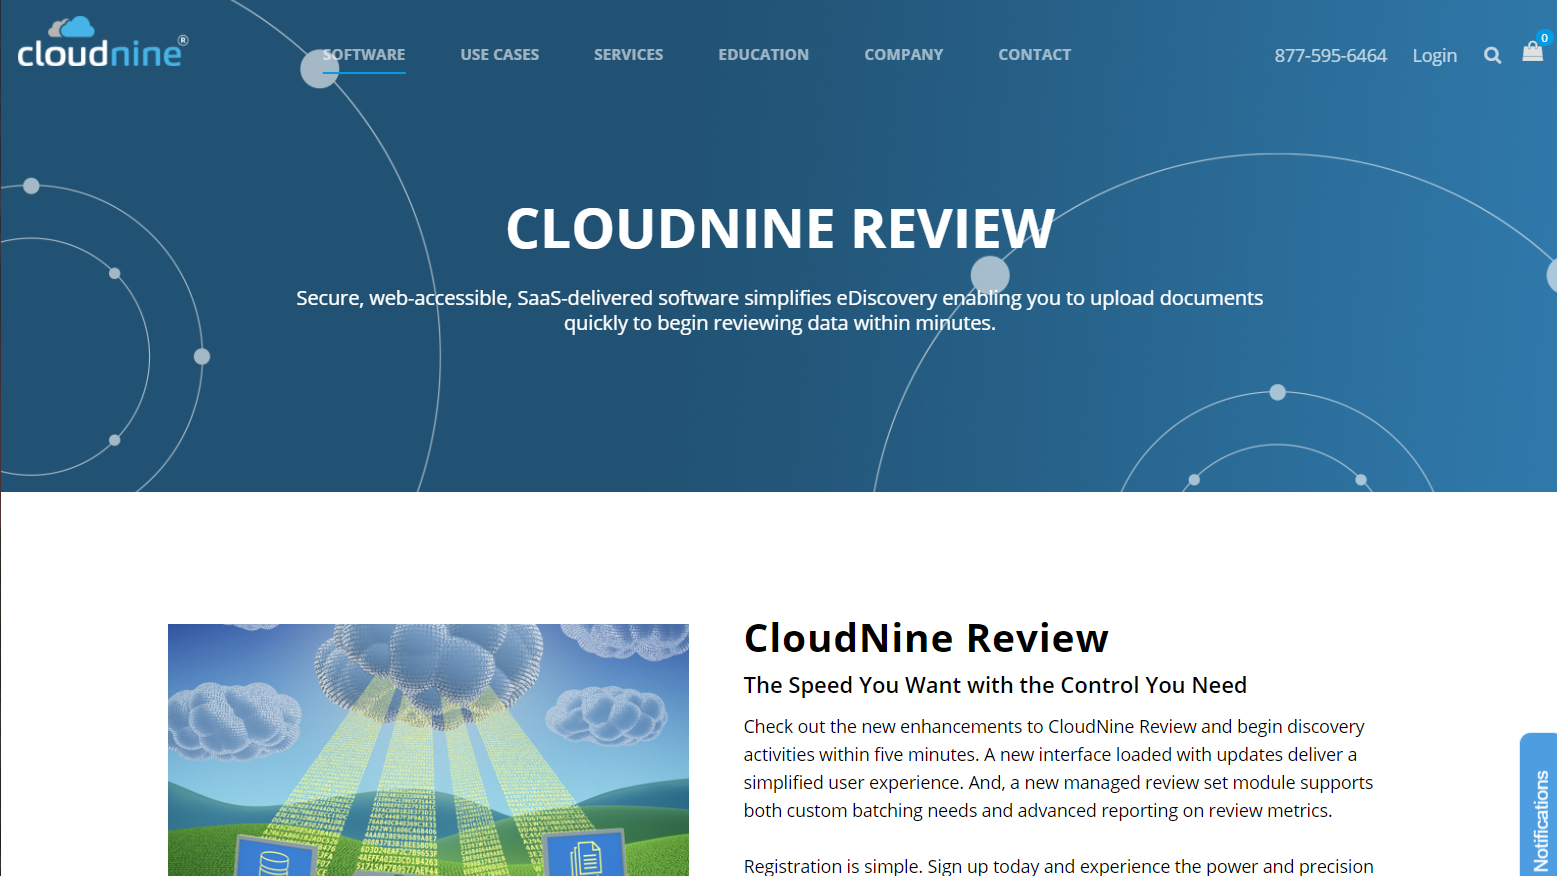 New Release of CloudNine Review Platform Enhances Self-Service Productions and Speeds Imaging